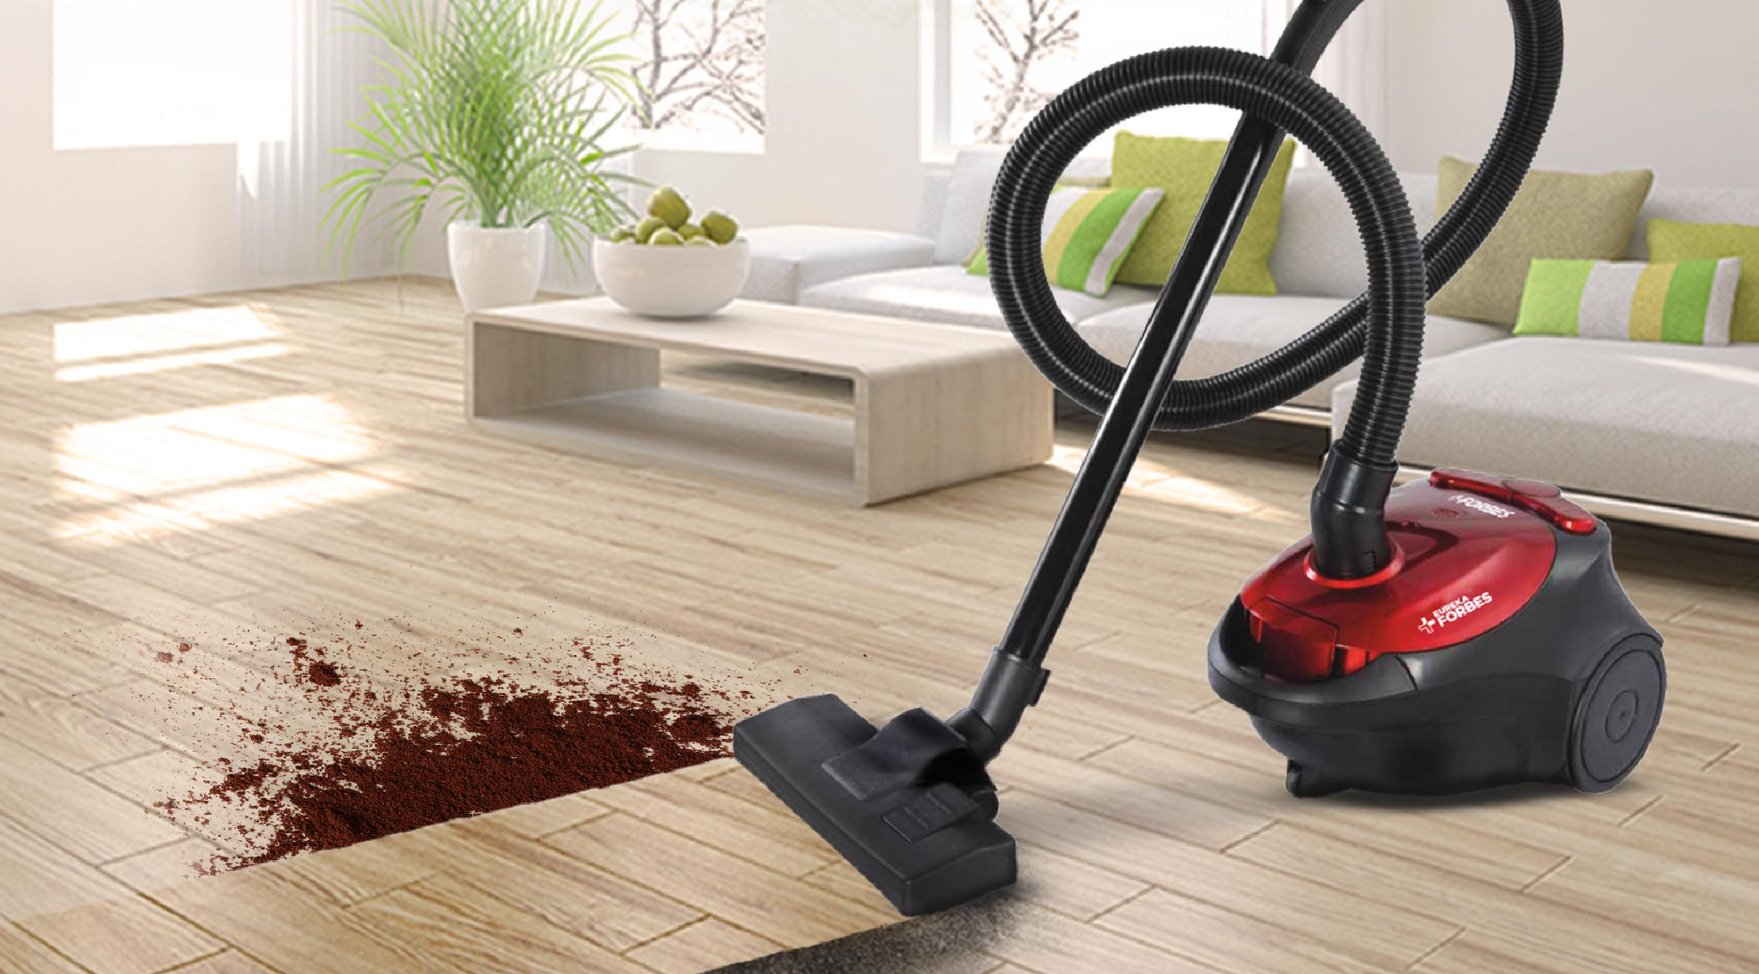 Vacuum cleaners: What they are, how they work, and why you need